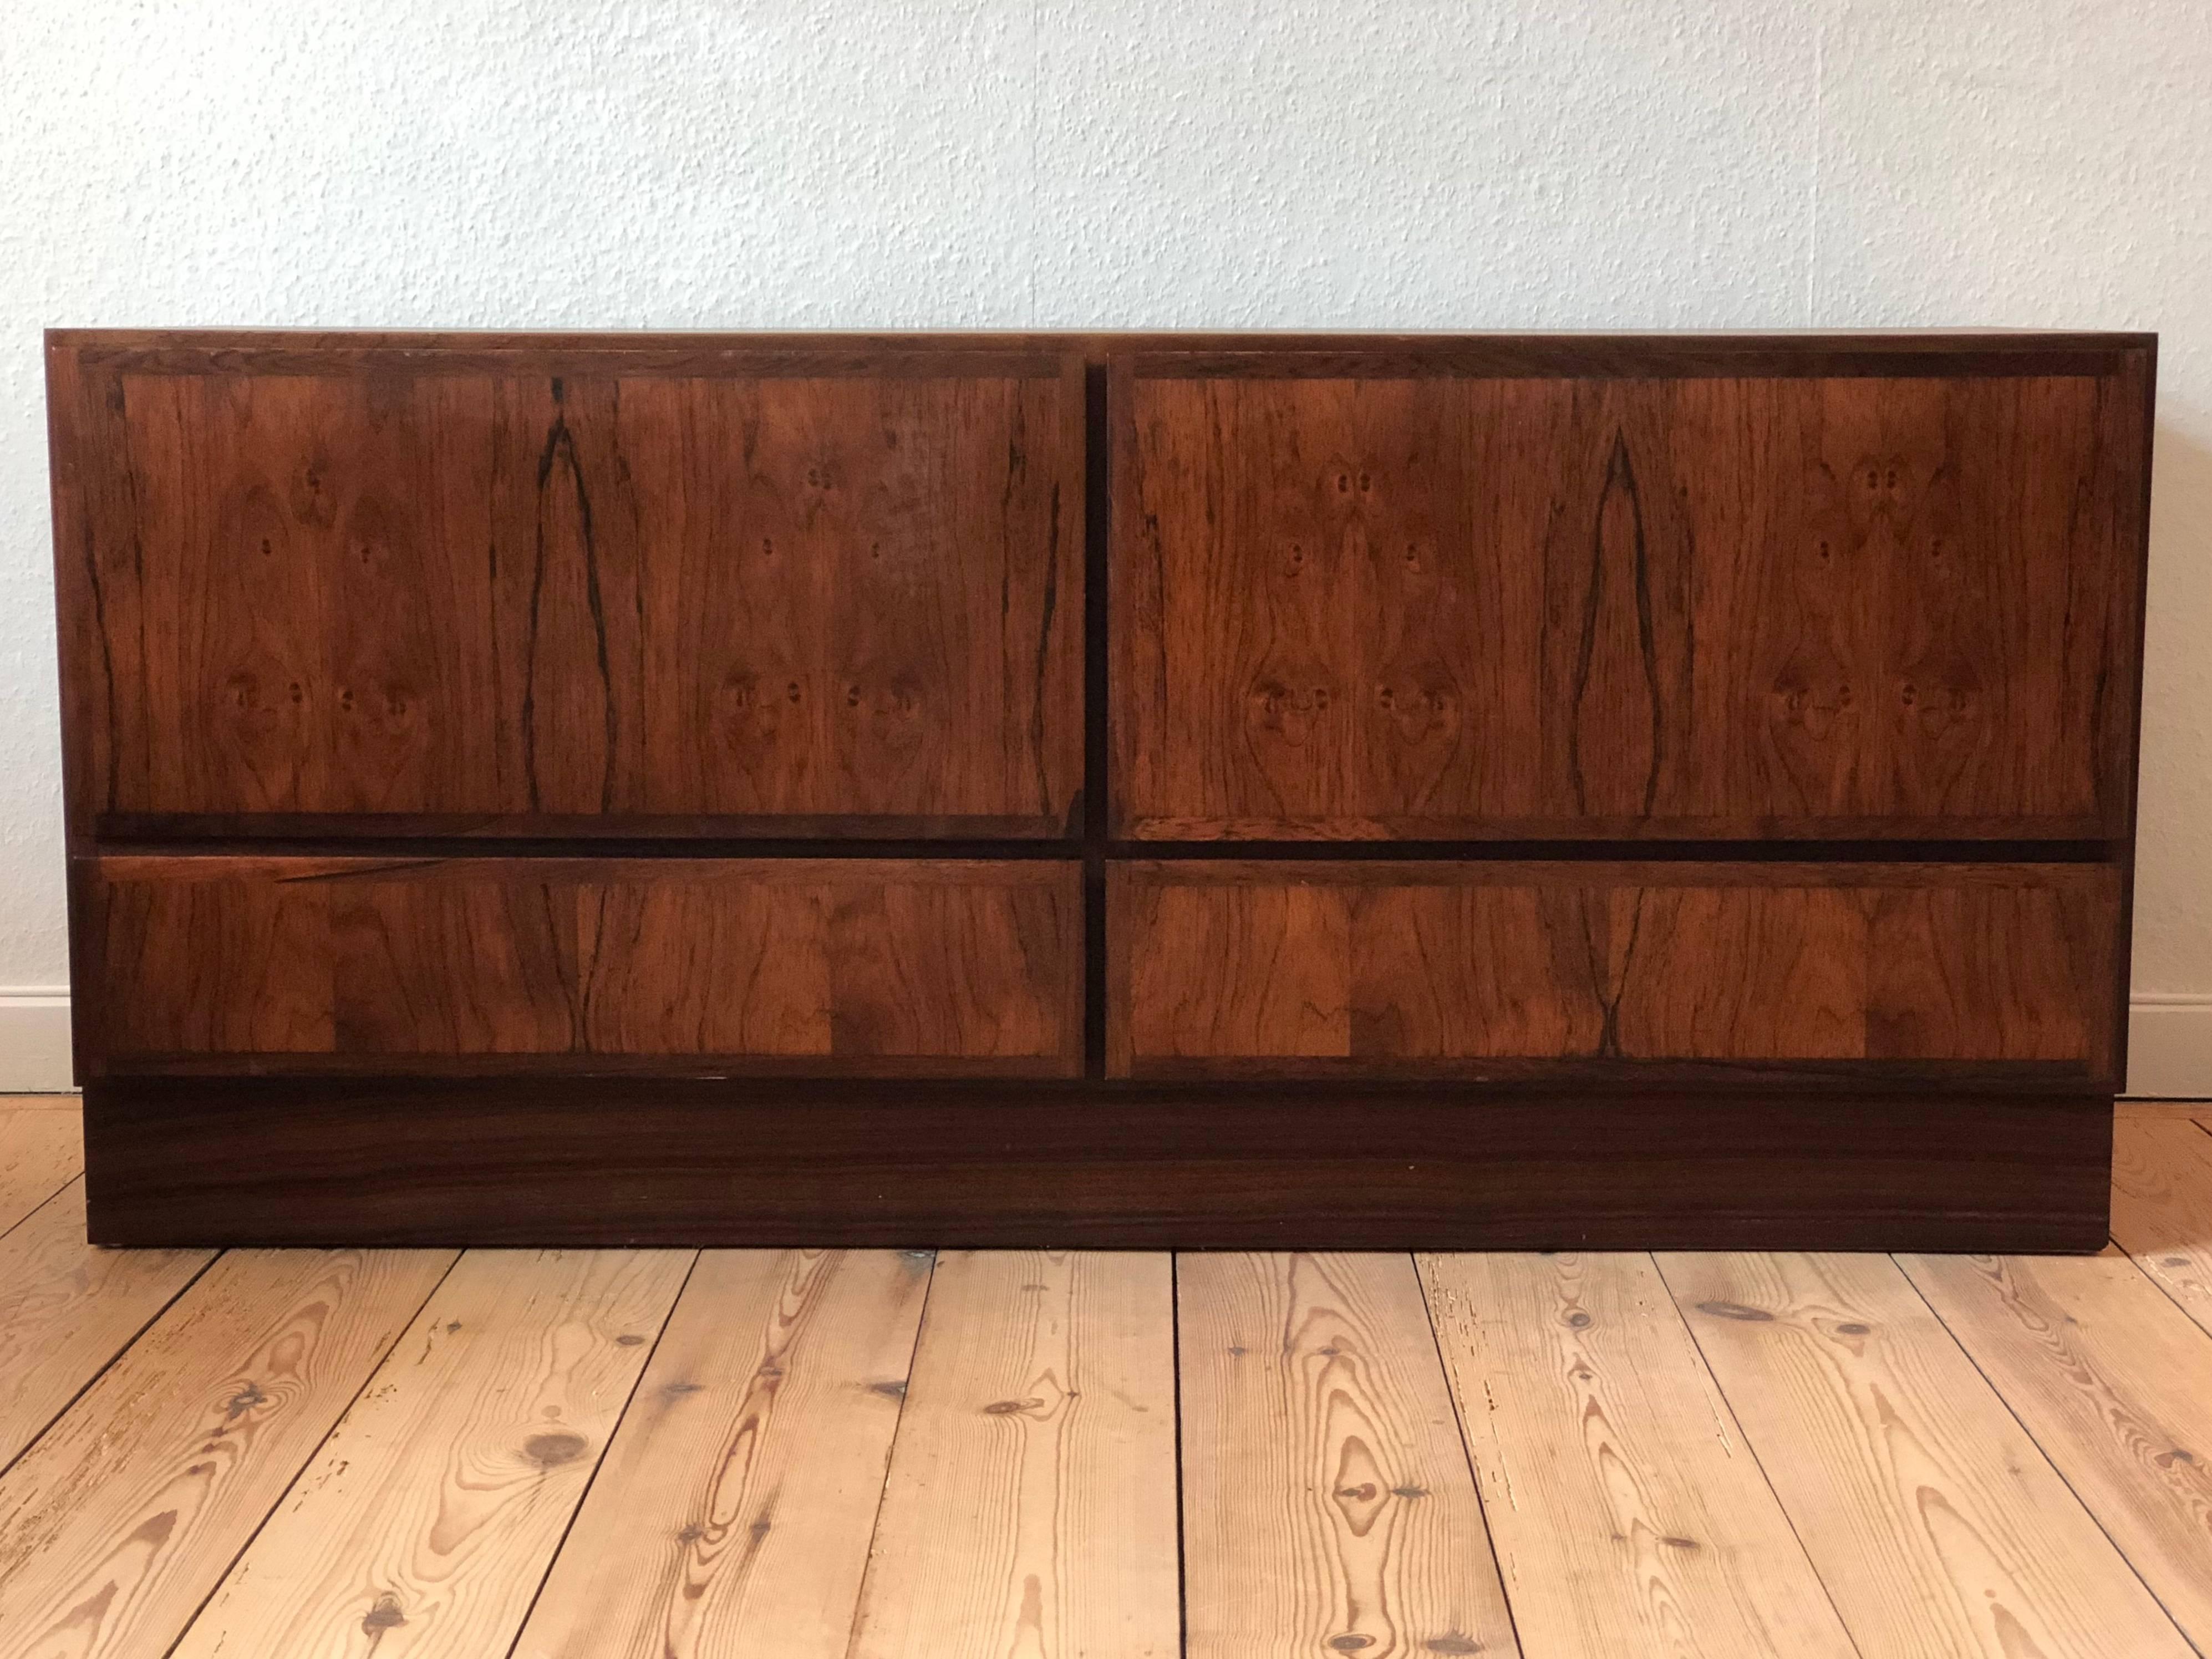 Rosewood cabinet from Gunni Omann Møbelfabrik. Features four drawers with bevelled edges, the top two have an ingenious secret locking device accessible from the bottom drawers. There are also plenty of access for cables via the real of the top two